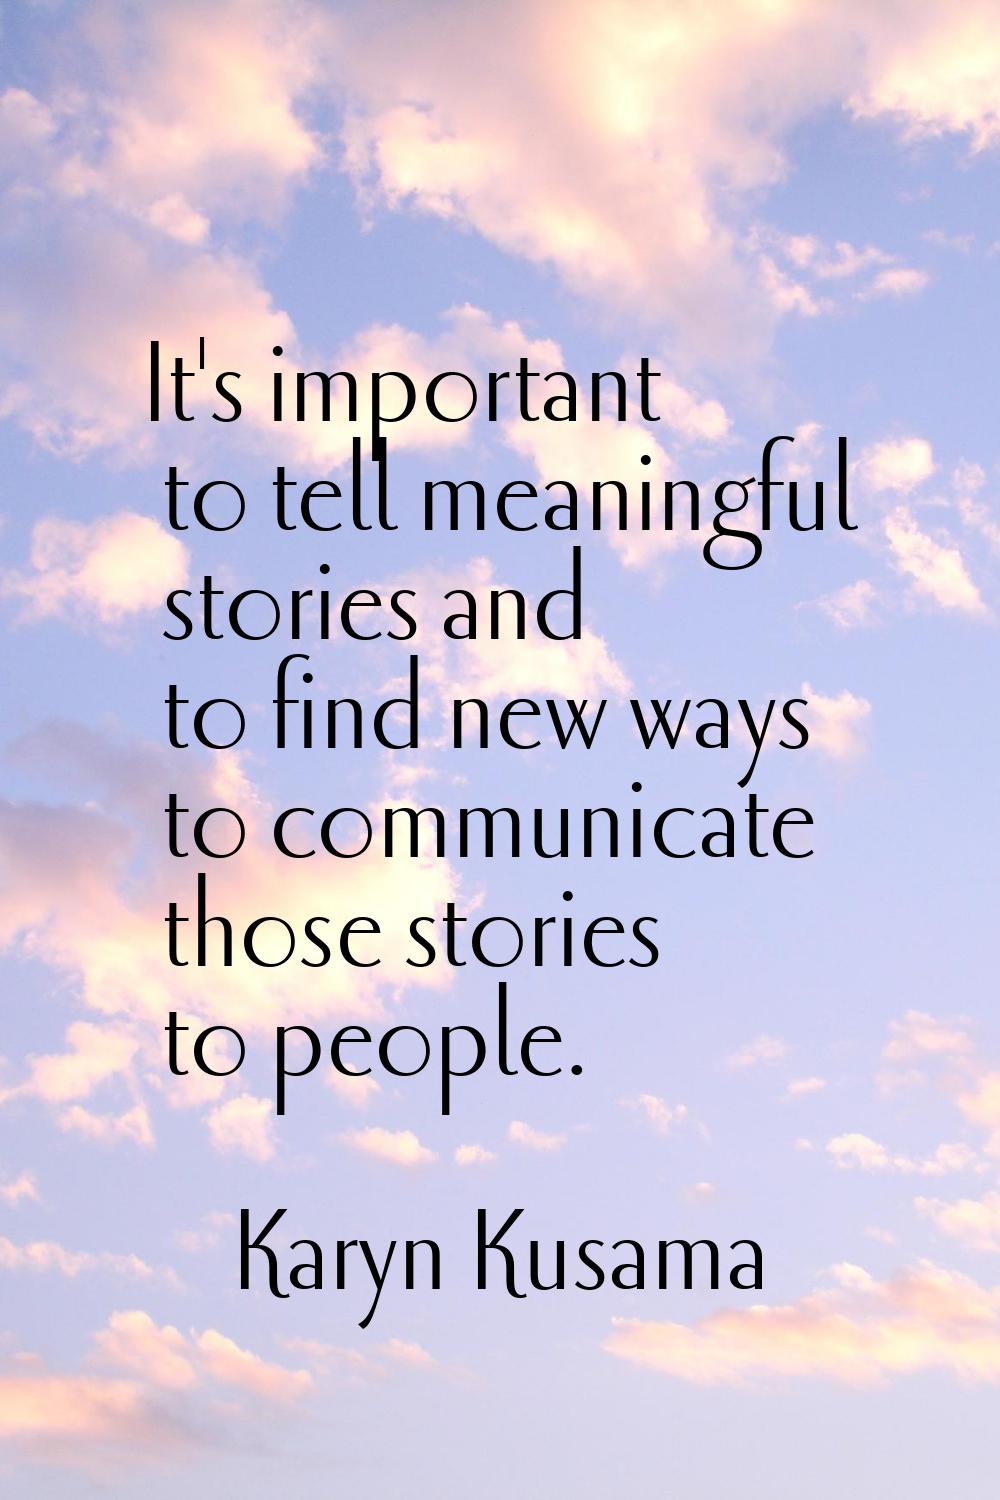 It's important to tell meaningful stories and to find new ways to communicate those stories to peop